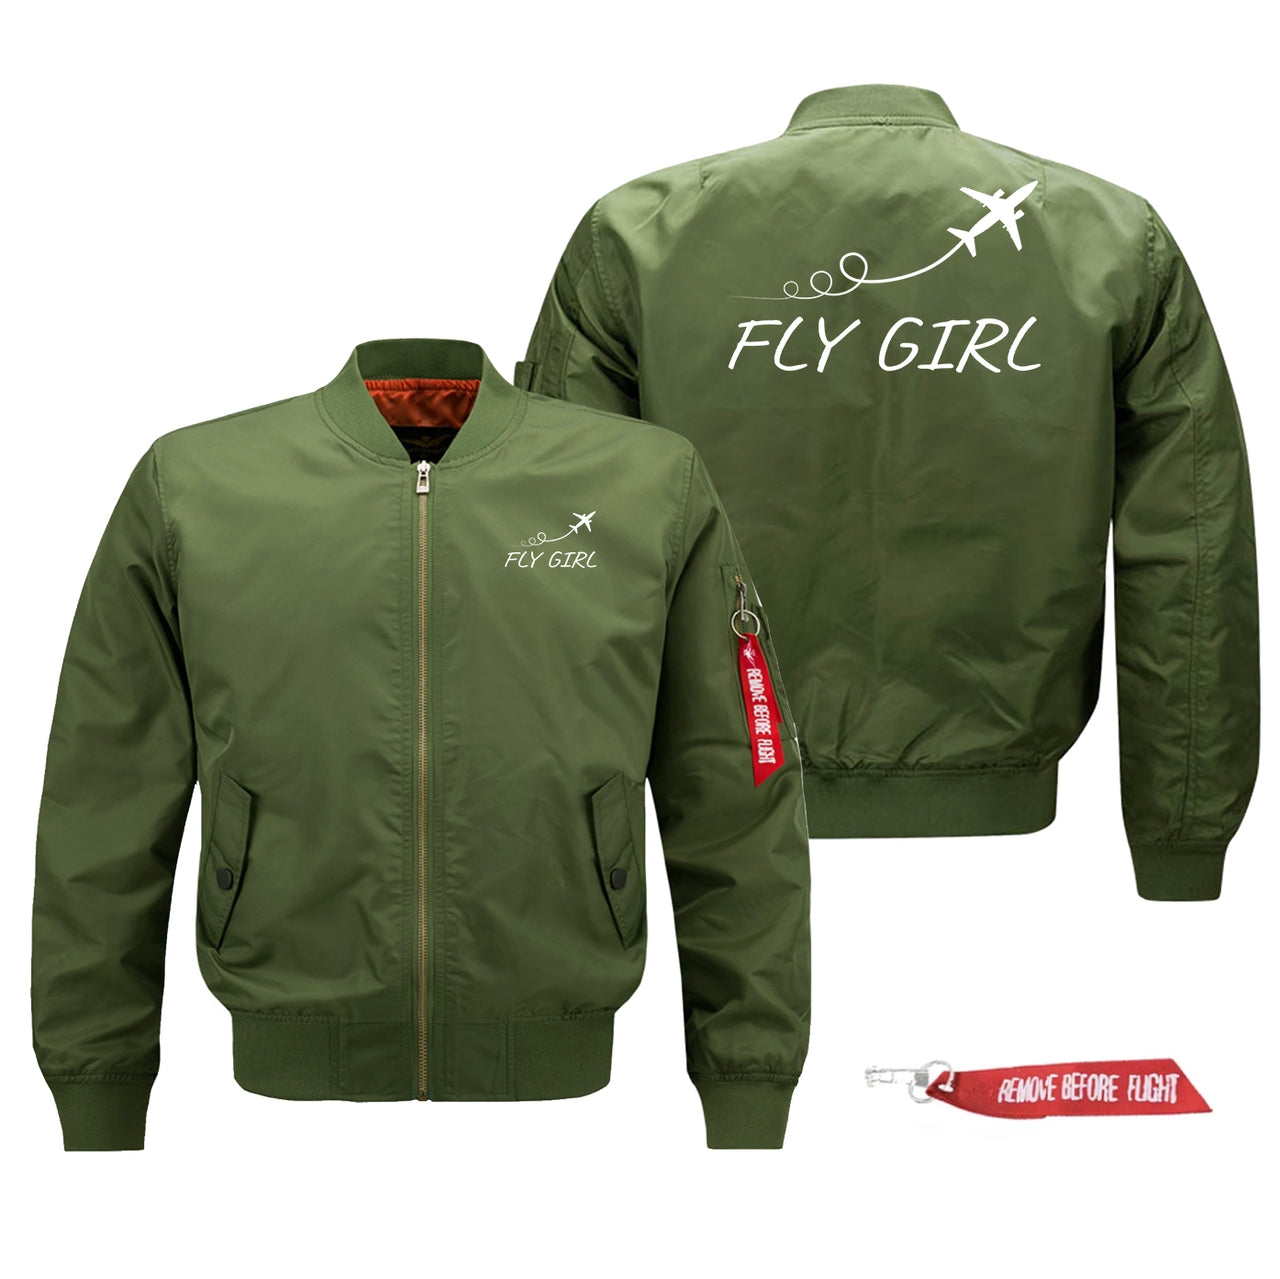 Just Fly It & Fly Girl Designed Pilot Jackets (Customizable)